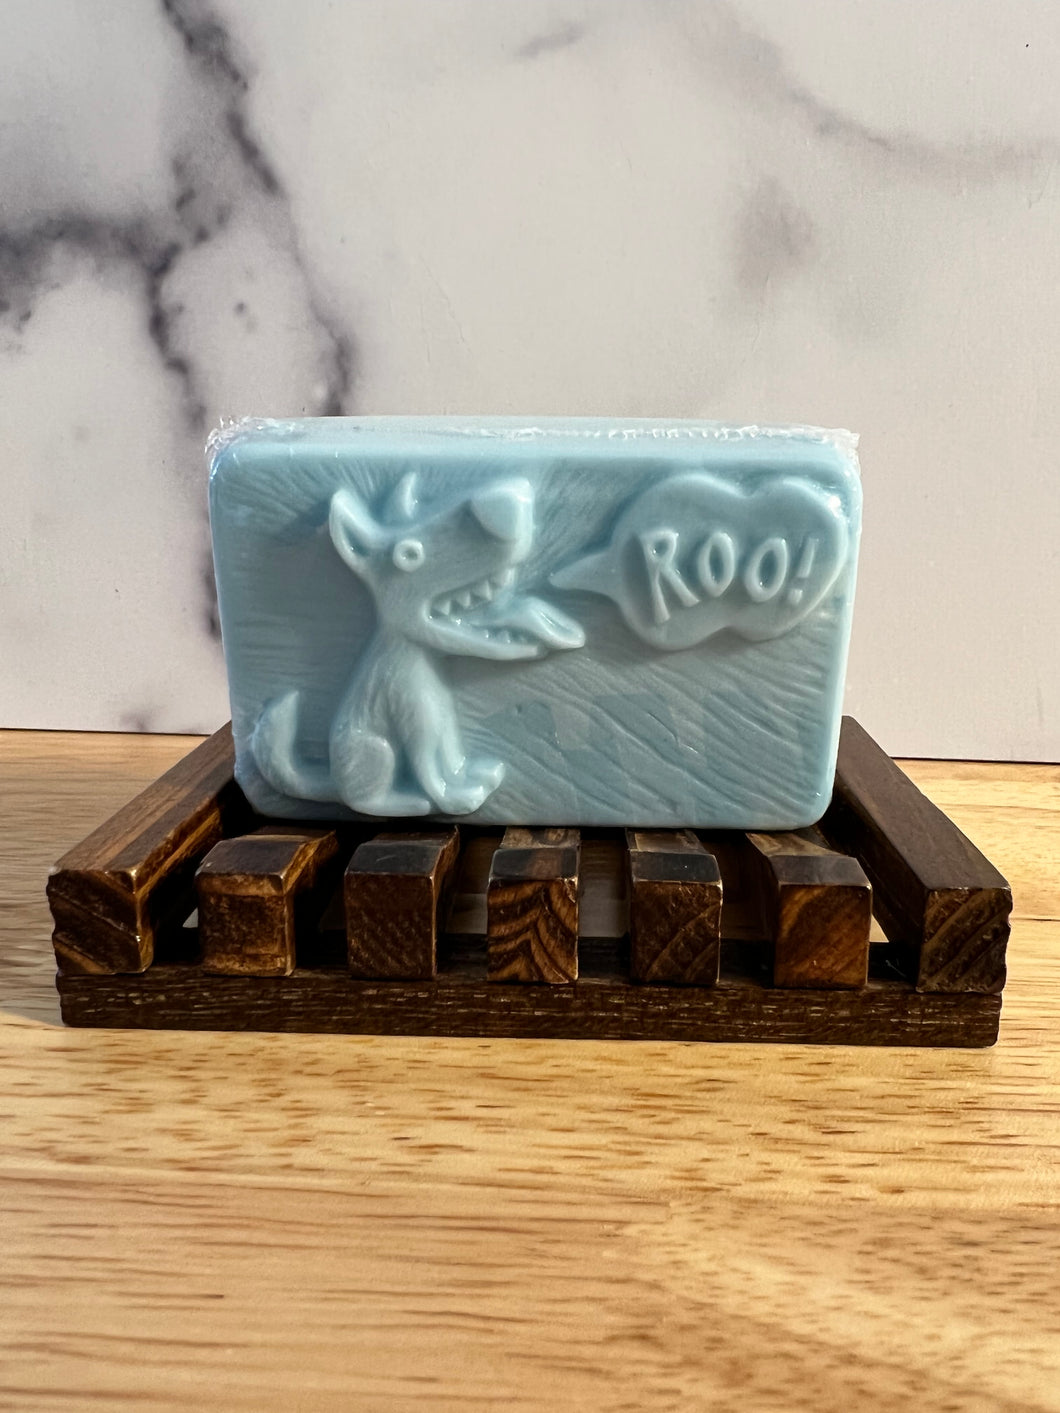 Pawgave Nectar - 4.25 oz Human Bar Soap - Sulfate Free - Roo Dog - Agave Nectar Scent